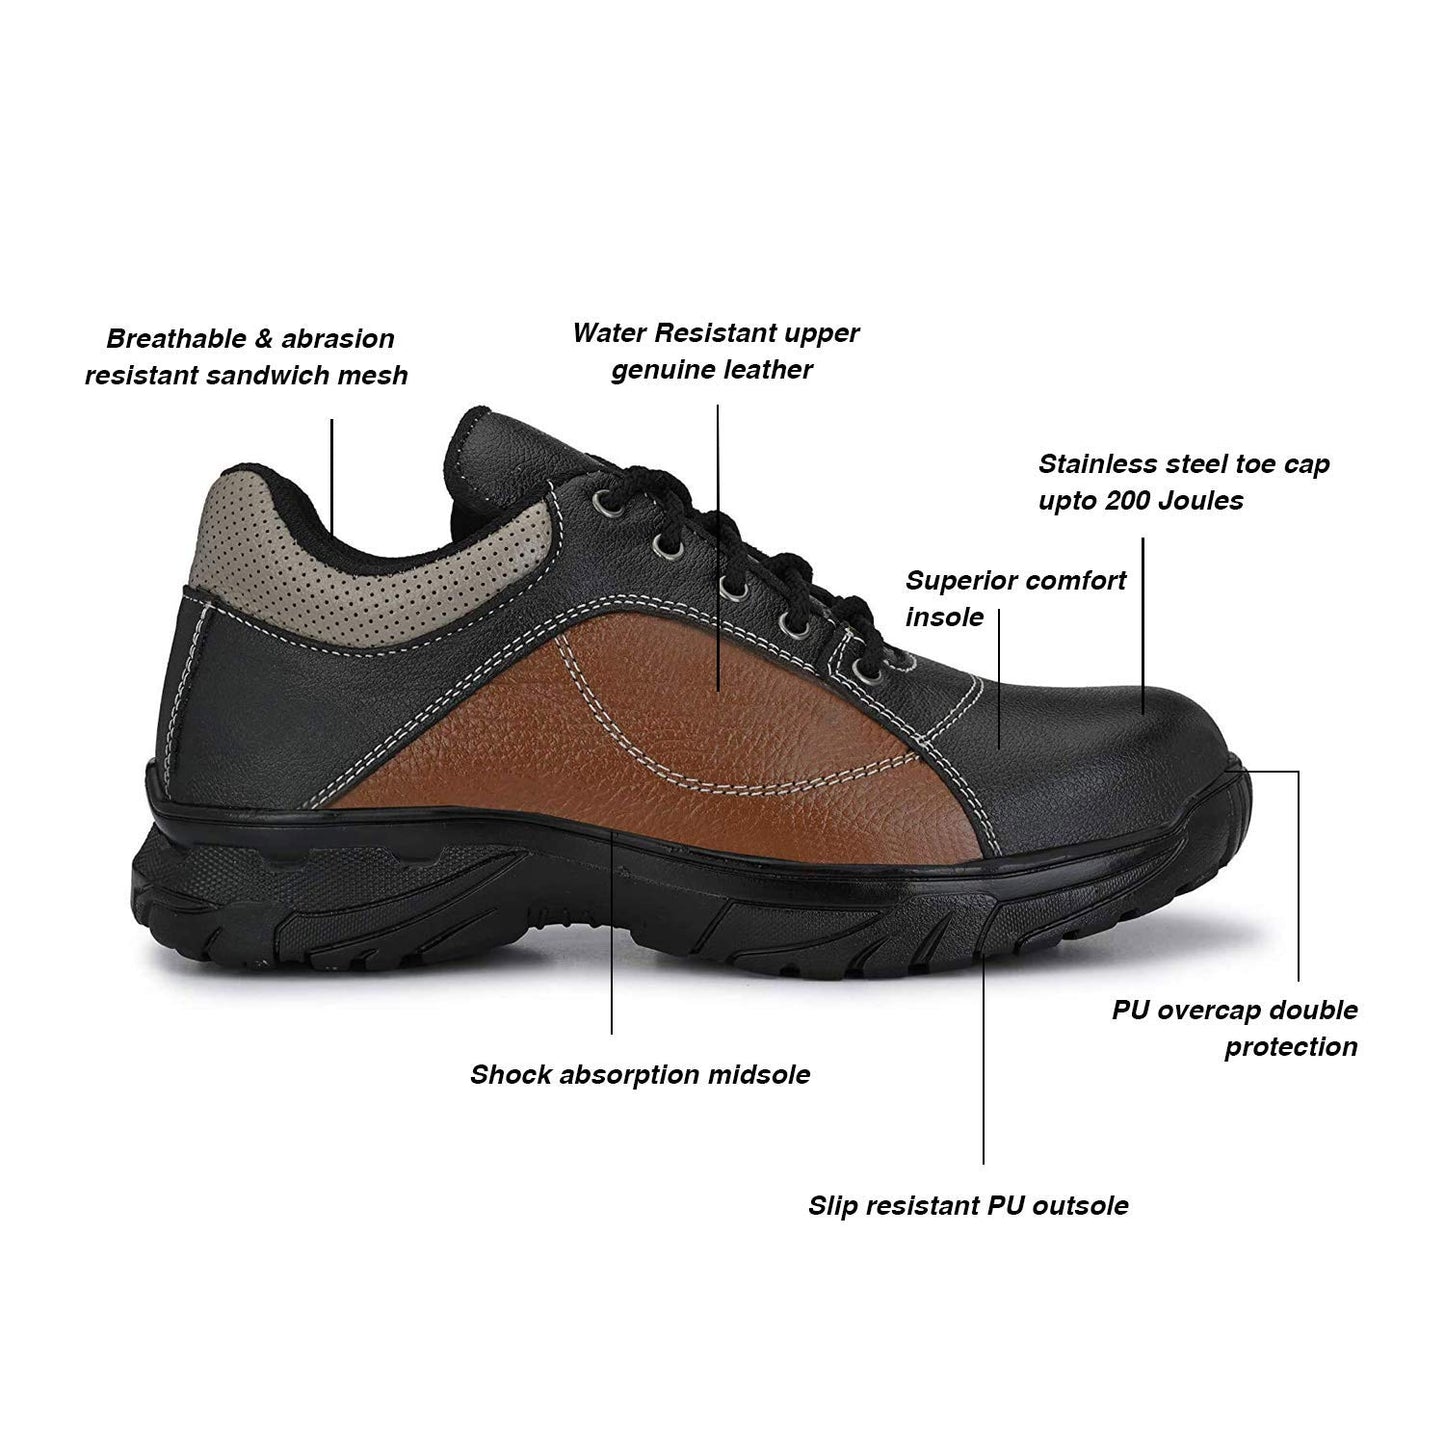 Aegon Thunder Industrial Water Resistant Anti Skid Leather Safety Shoes for Men - Black & Brown